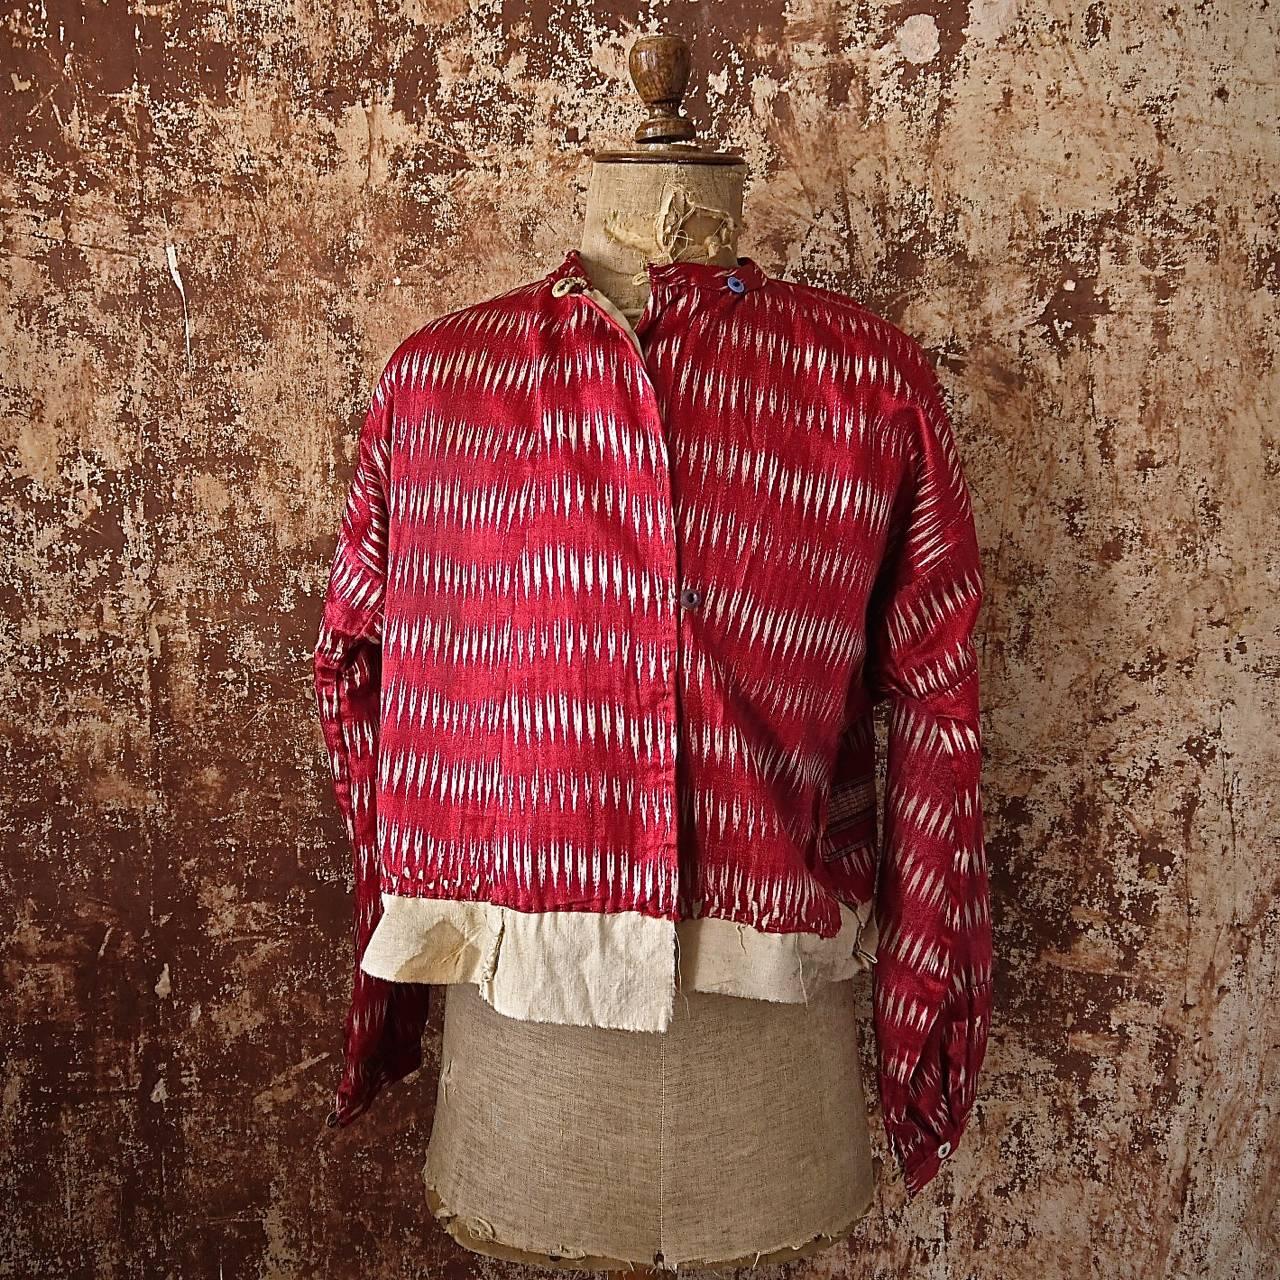 Early 20th century ottoman beautiful red and yellow silk Ikat coat from Aleppo with a cotton lining
Some marks and staining and a patch
Measures: Neck to hem 48/58cm(19”/22”)
Across the chest 65cm (25” wide.)